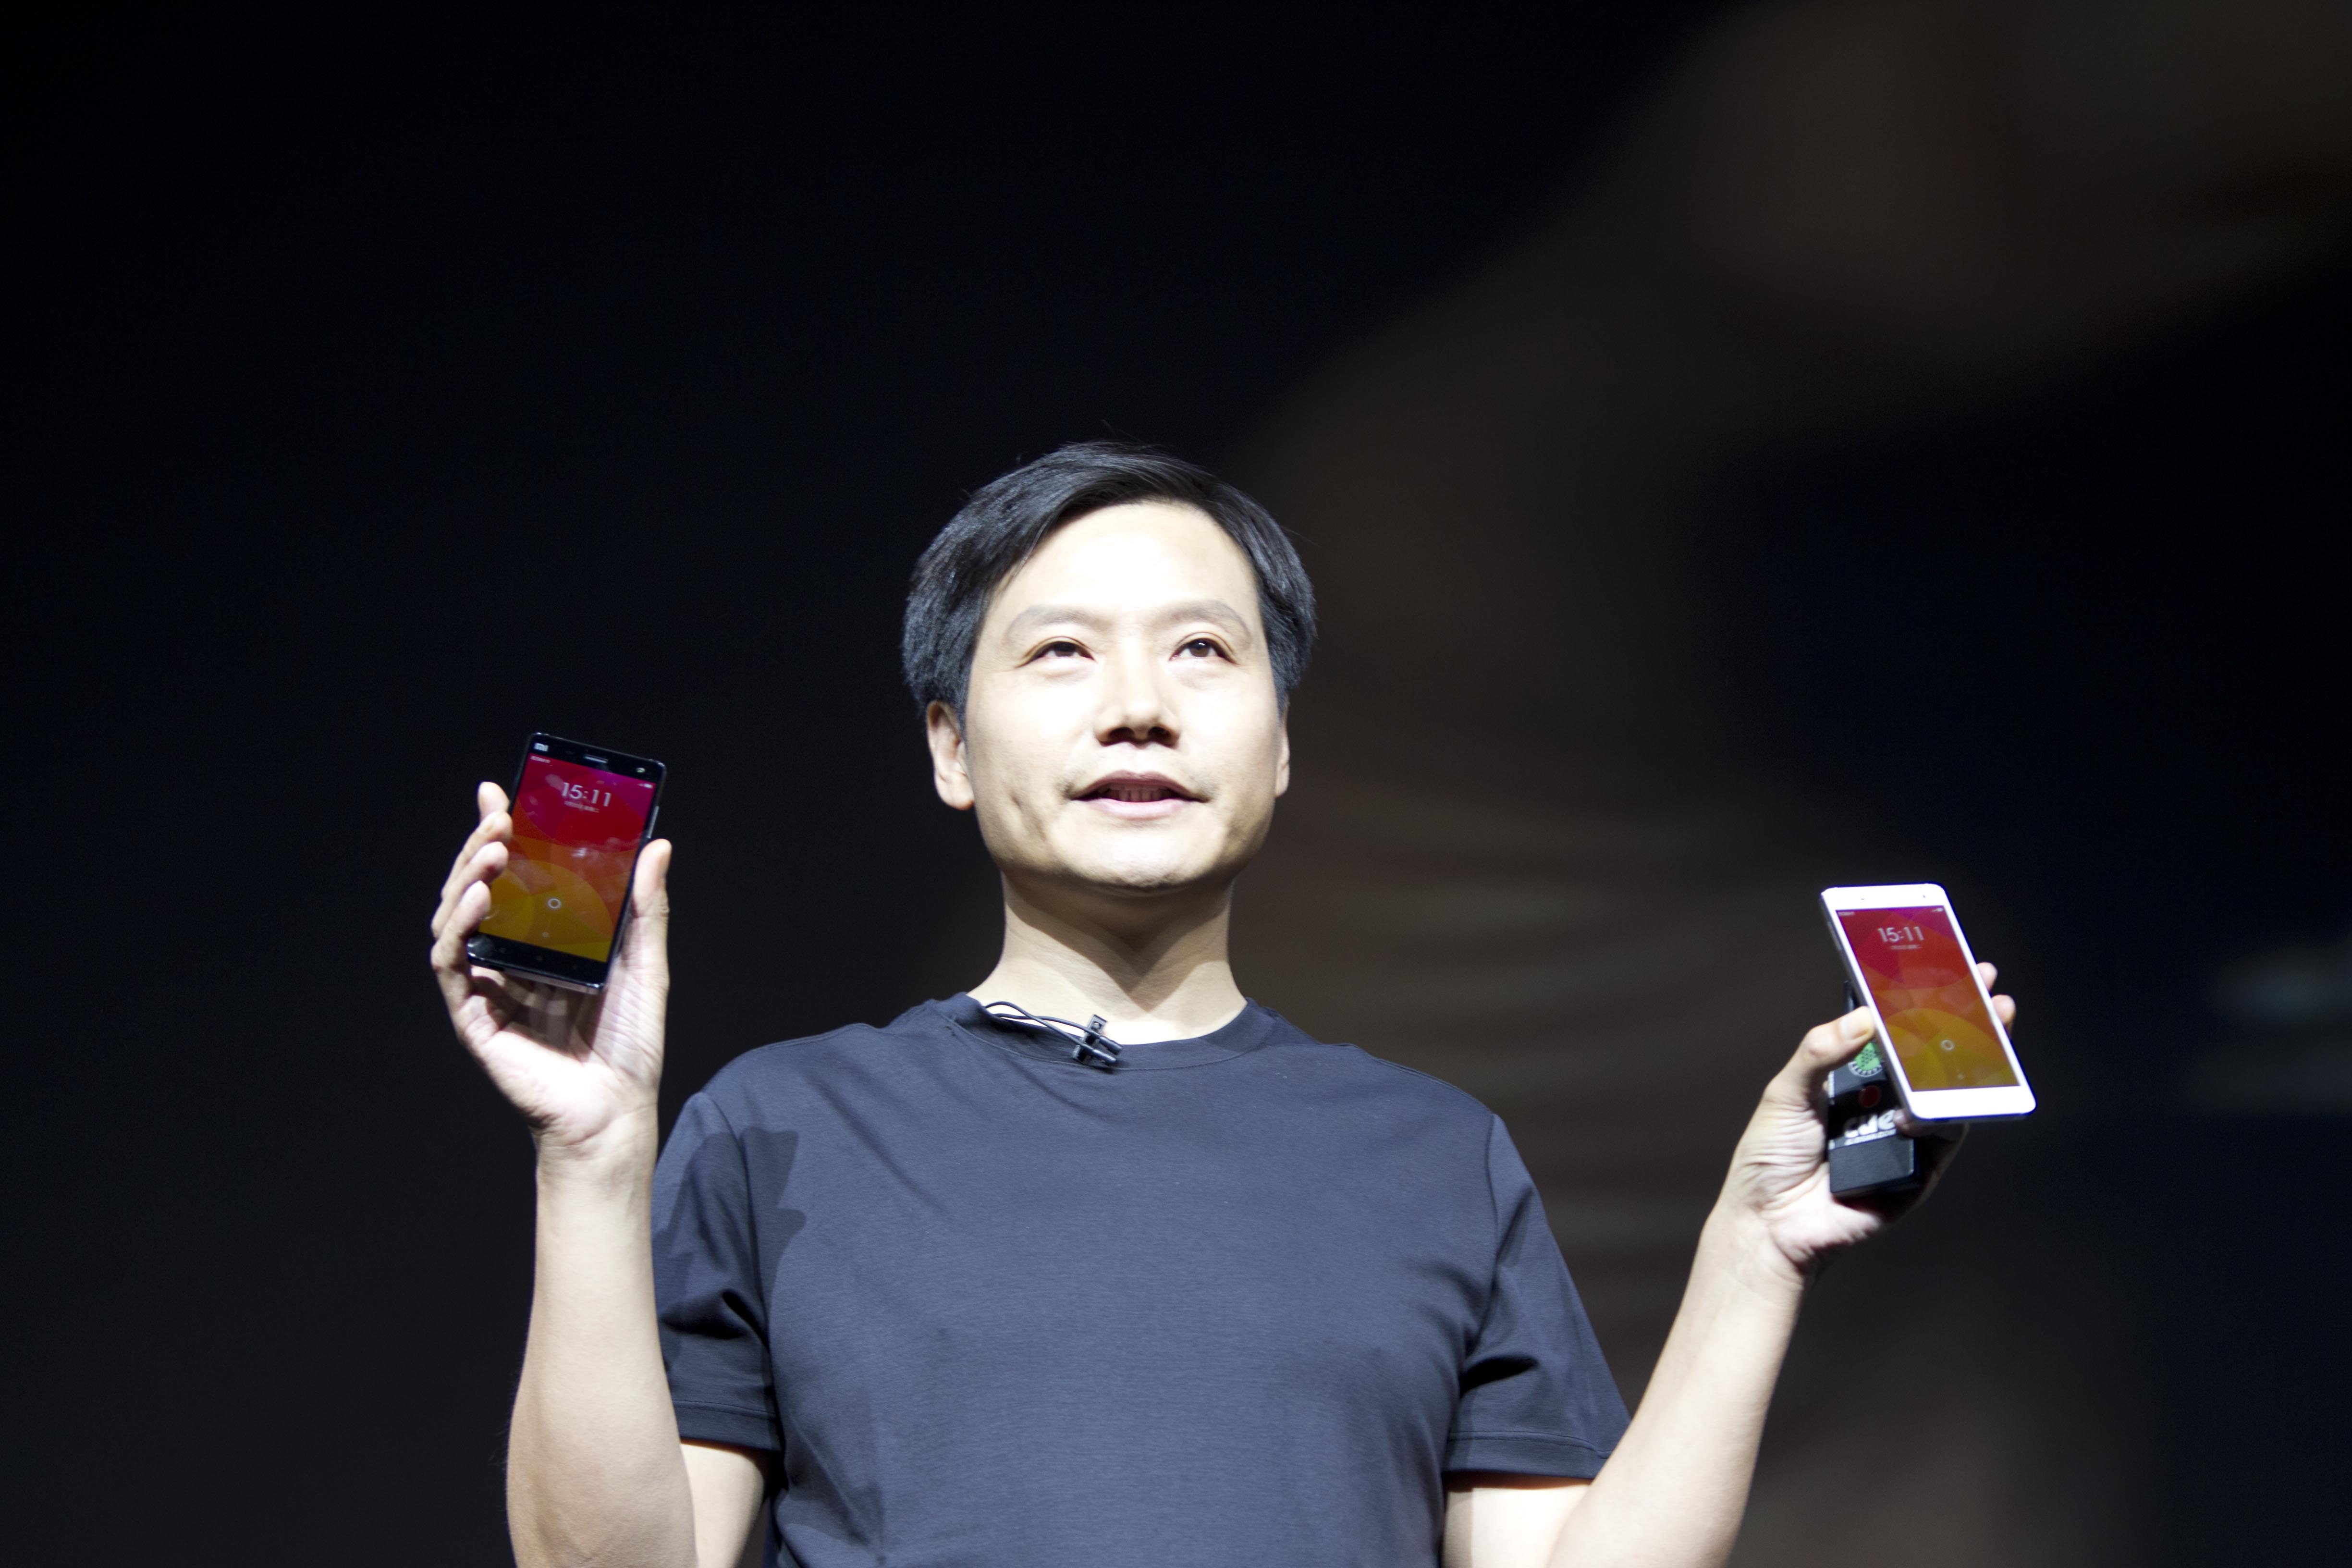 Lei Jun, CEO of Xiaomi, launches the new Xiaomi 4 smart phone in Beijing on July 22, 2014. Photo: Simon Song